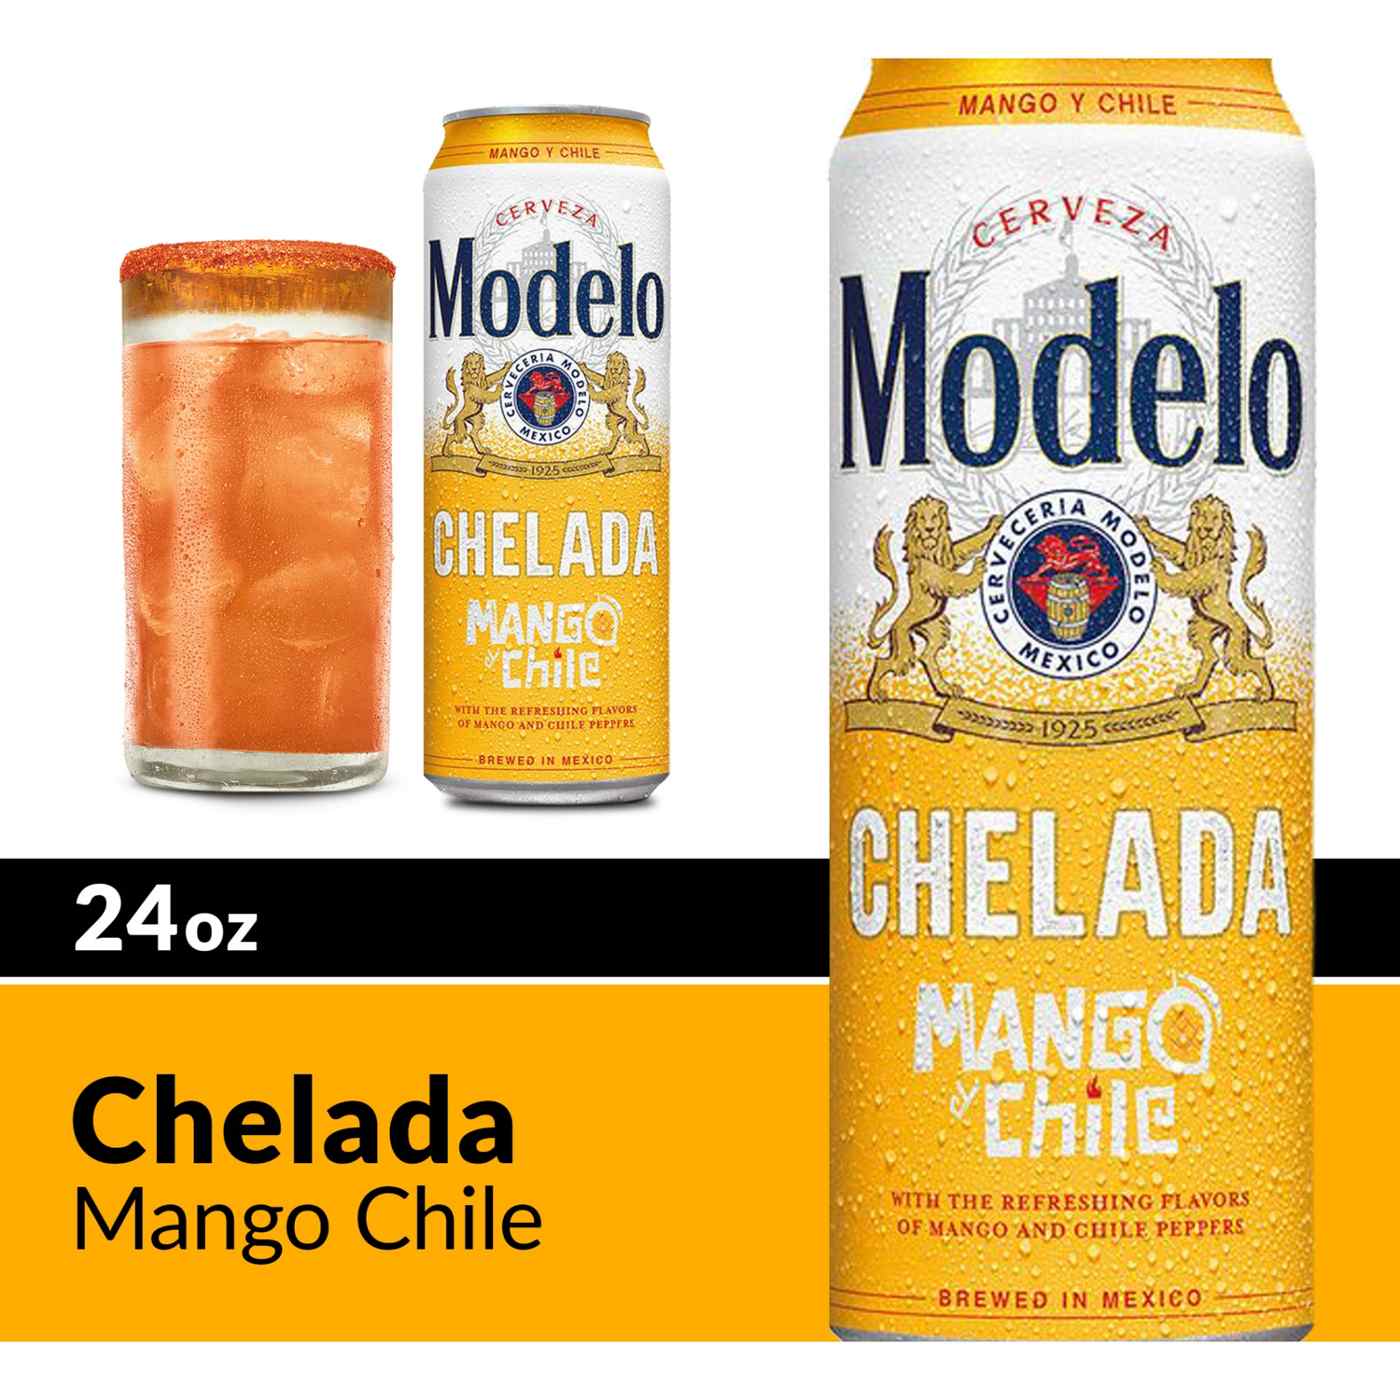 Modelo Chelada Mango y Chile Mexican Import Flavored Beer 24 oz Can; image 9 of 9